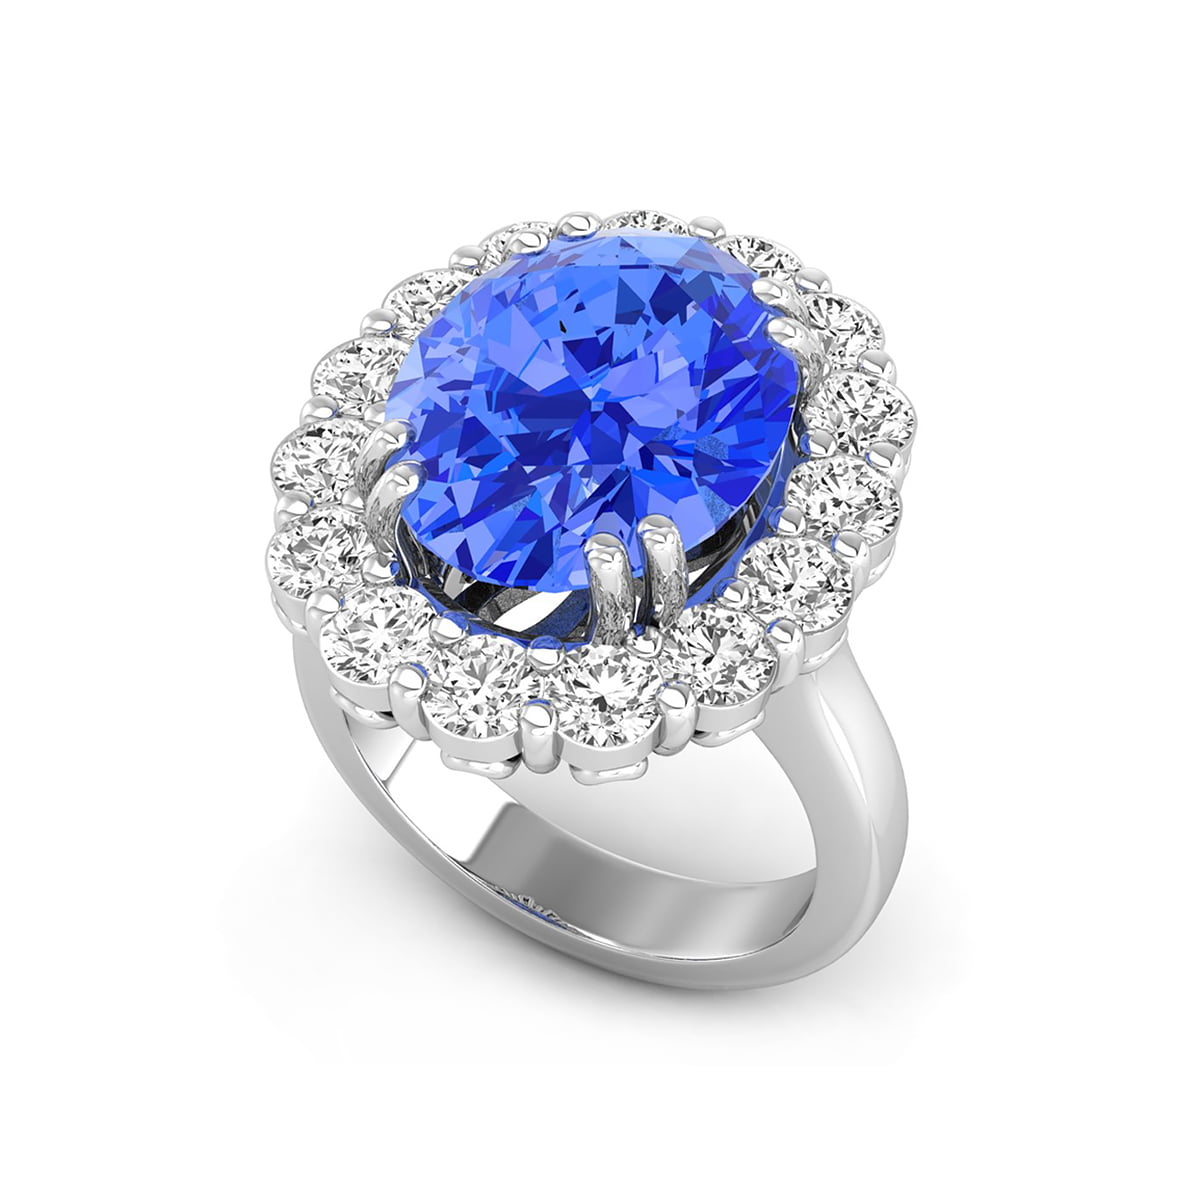 Royal Blue Sapphire Oval Cut With Round White CZ Stone Floral Motif Halo Engagement Ring ( 9 7/8 TCW )